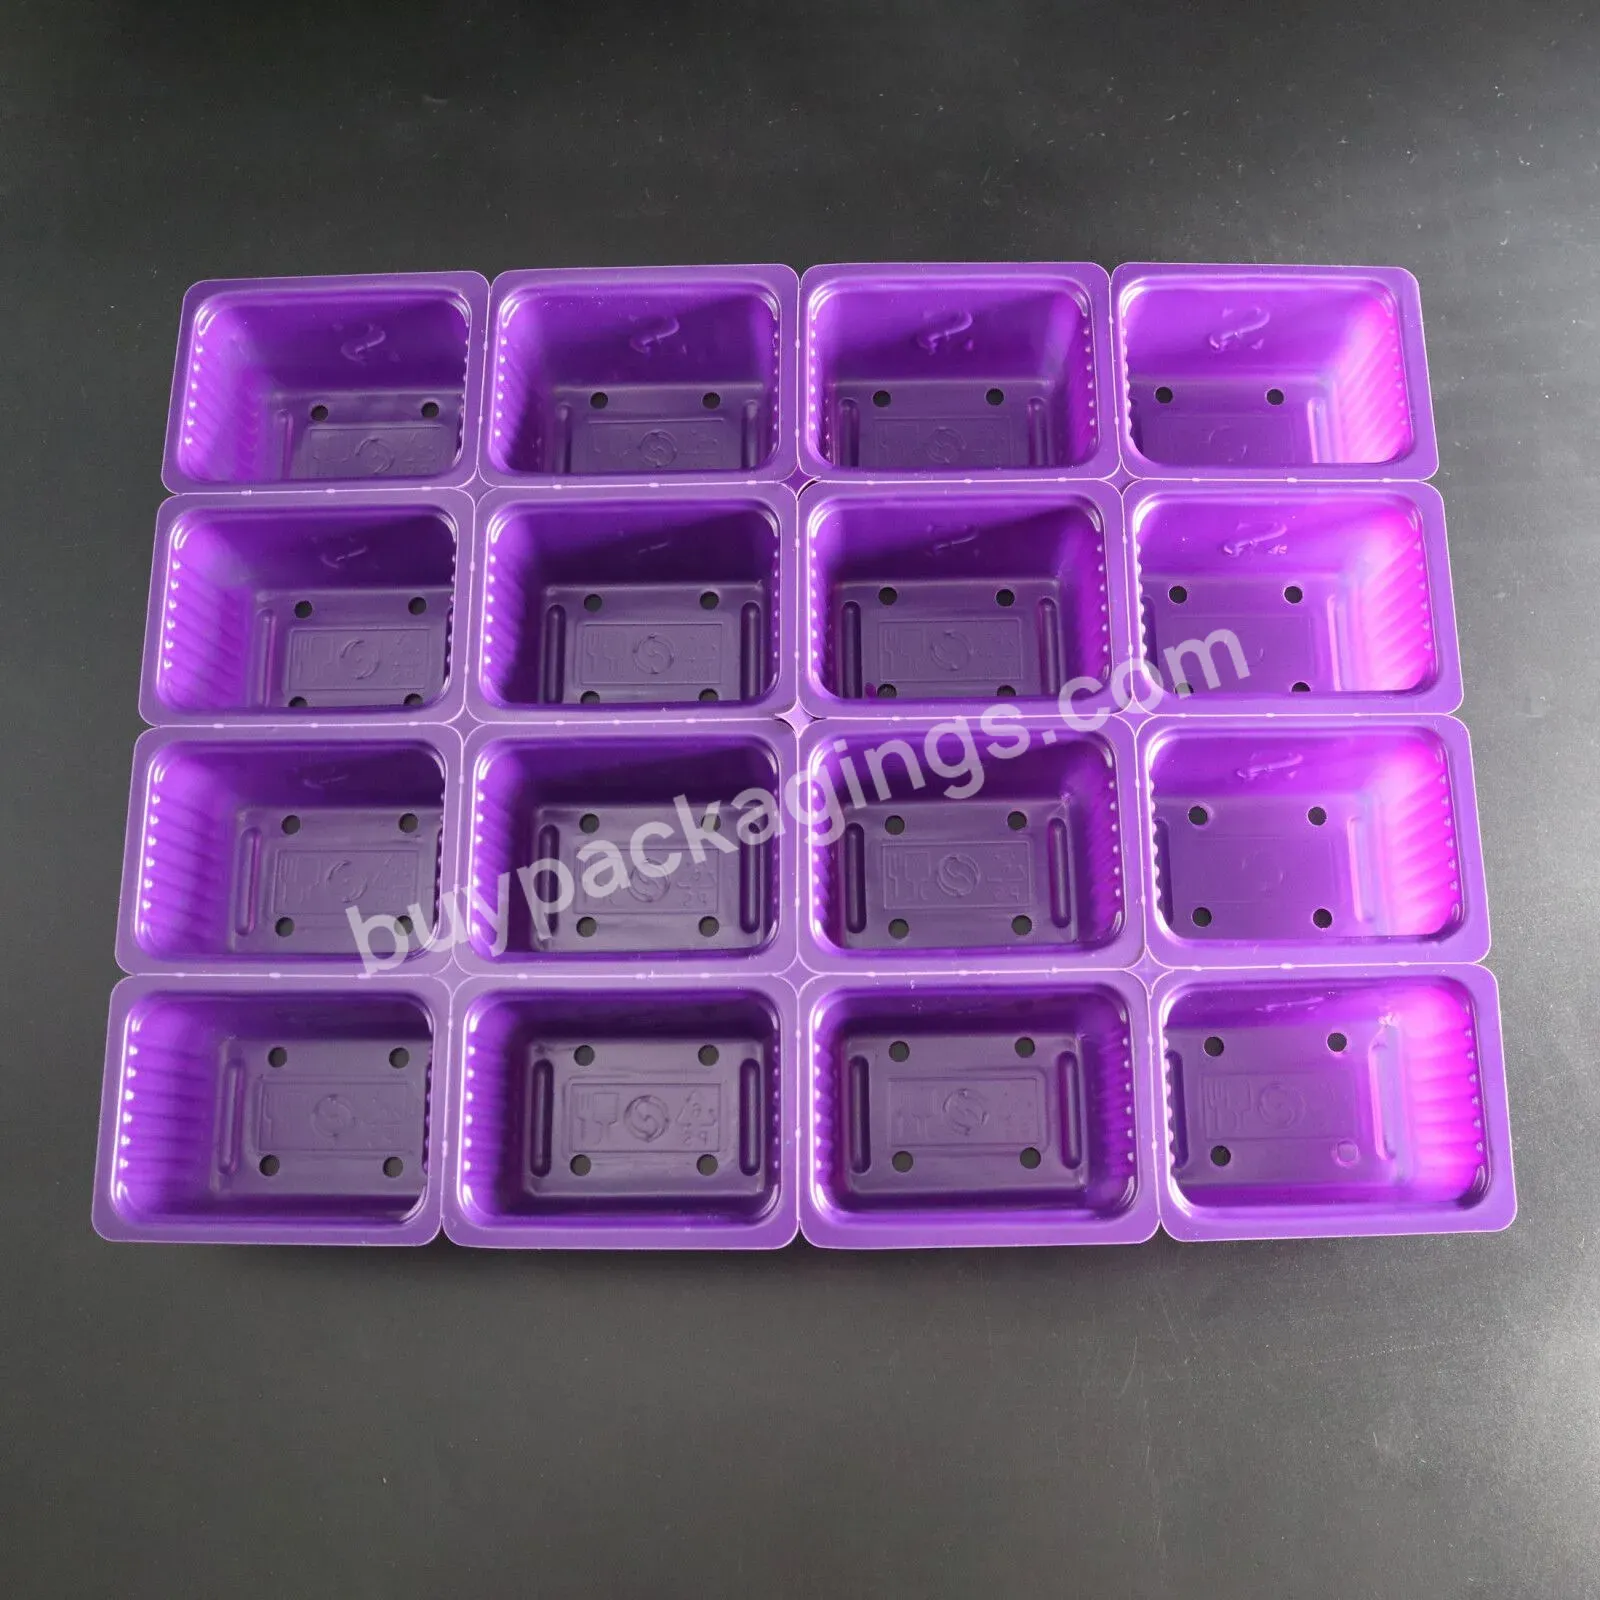 Wholesale Plastic Cell Seed Nursery Planting Seed Starter Tray Rice Seedling Tray - Buy Rice Seeding Trays,Nursery Planting Seed Starter Tray,Wholesale Plant Tray For Growing Seedlings.